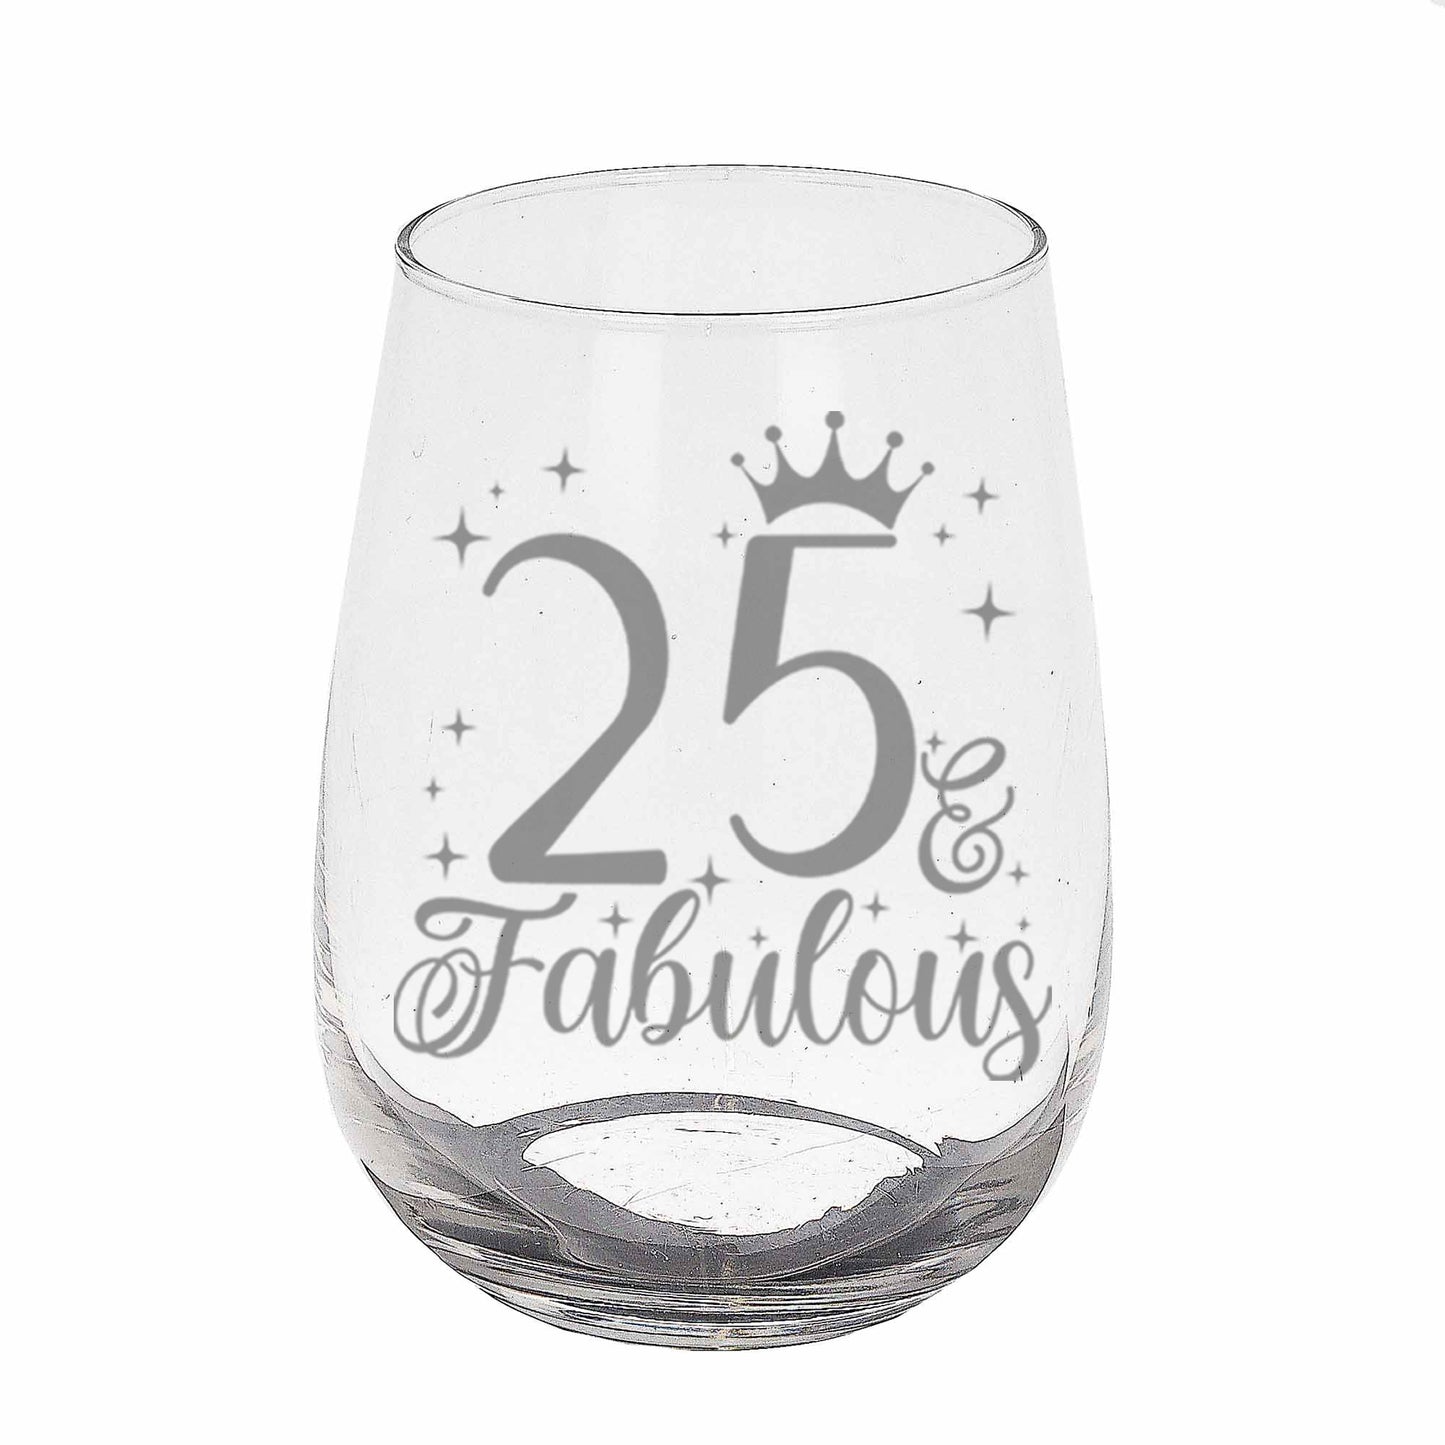 25 & Fabulous Engraved Stemless Gin Glass and/or Coaster Set  - Always Looking Good - Stemless Gin Glass On Its Own  